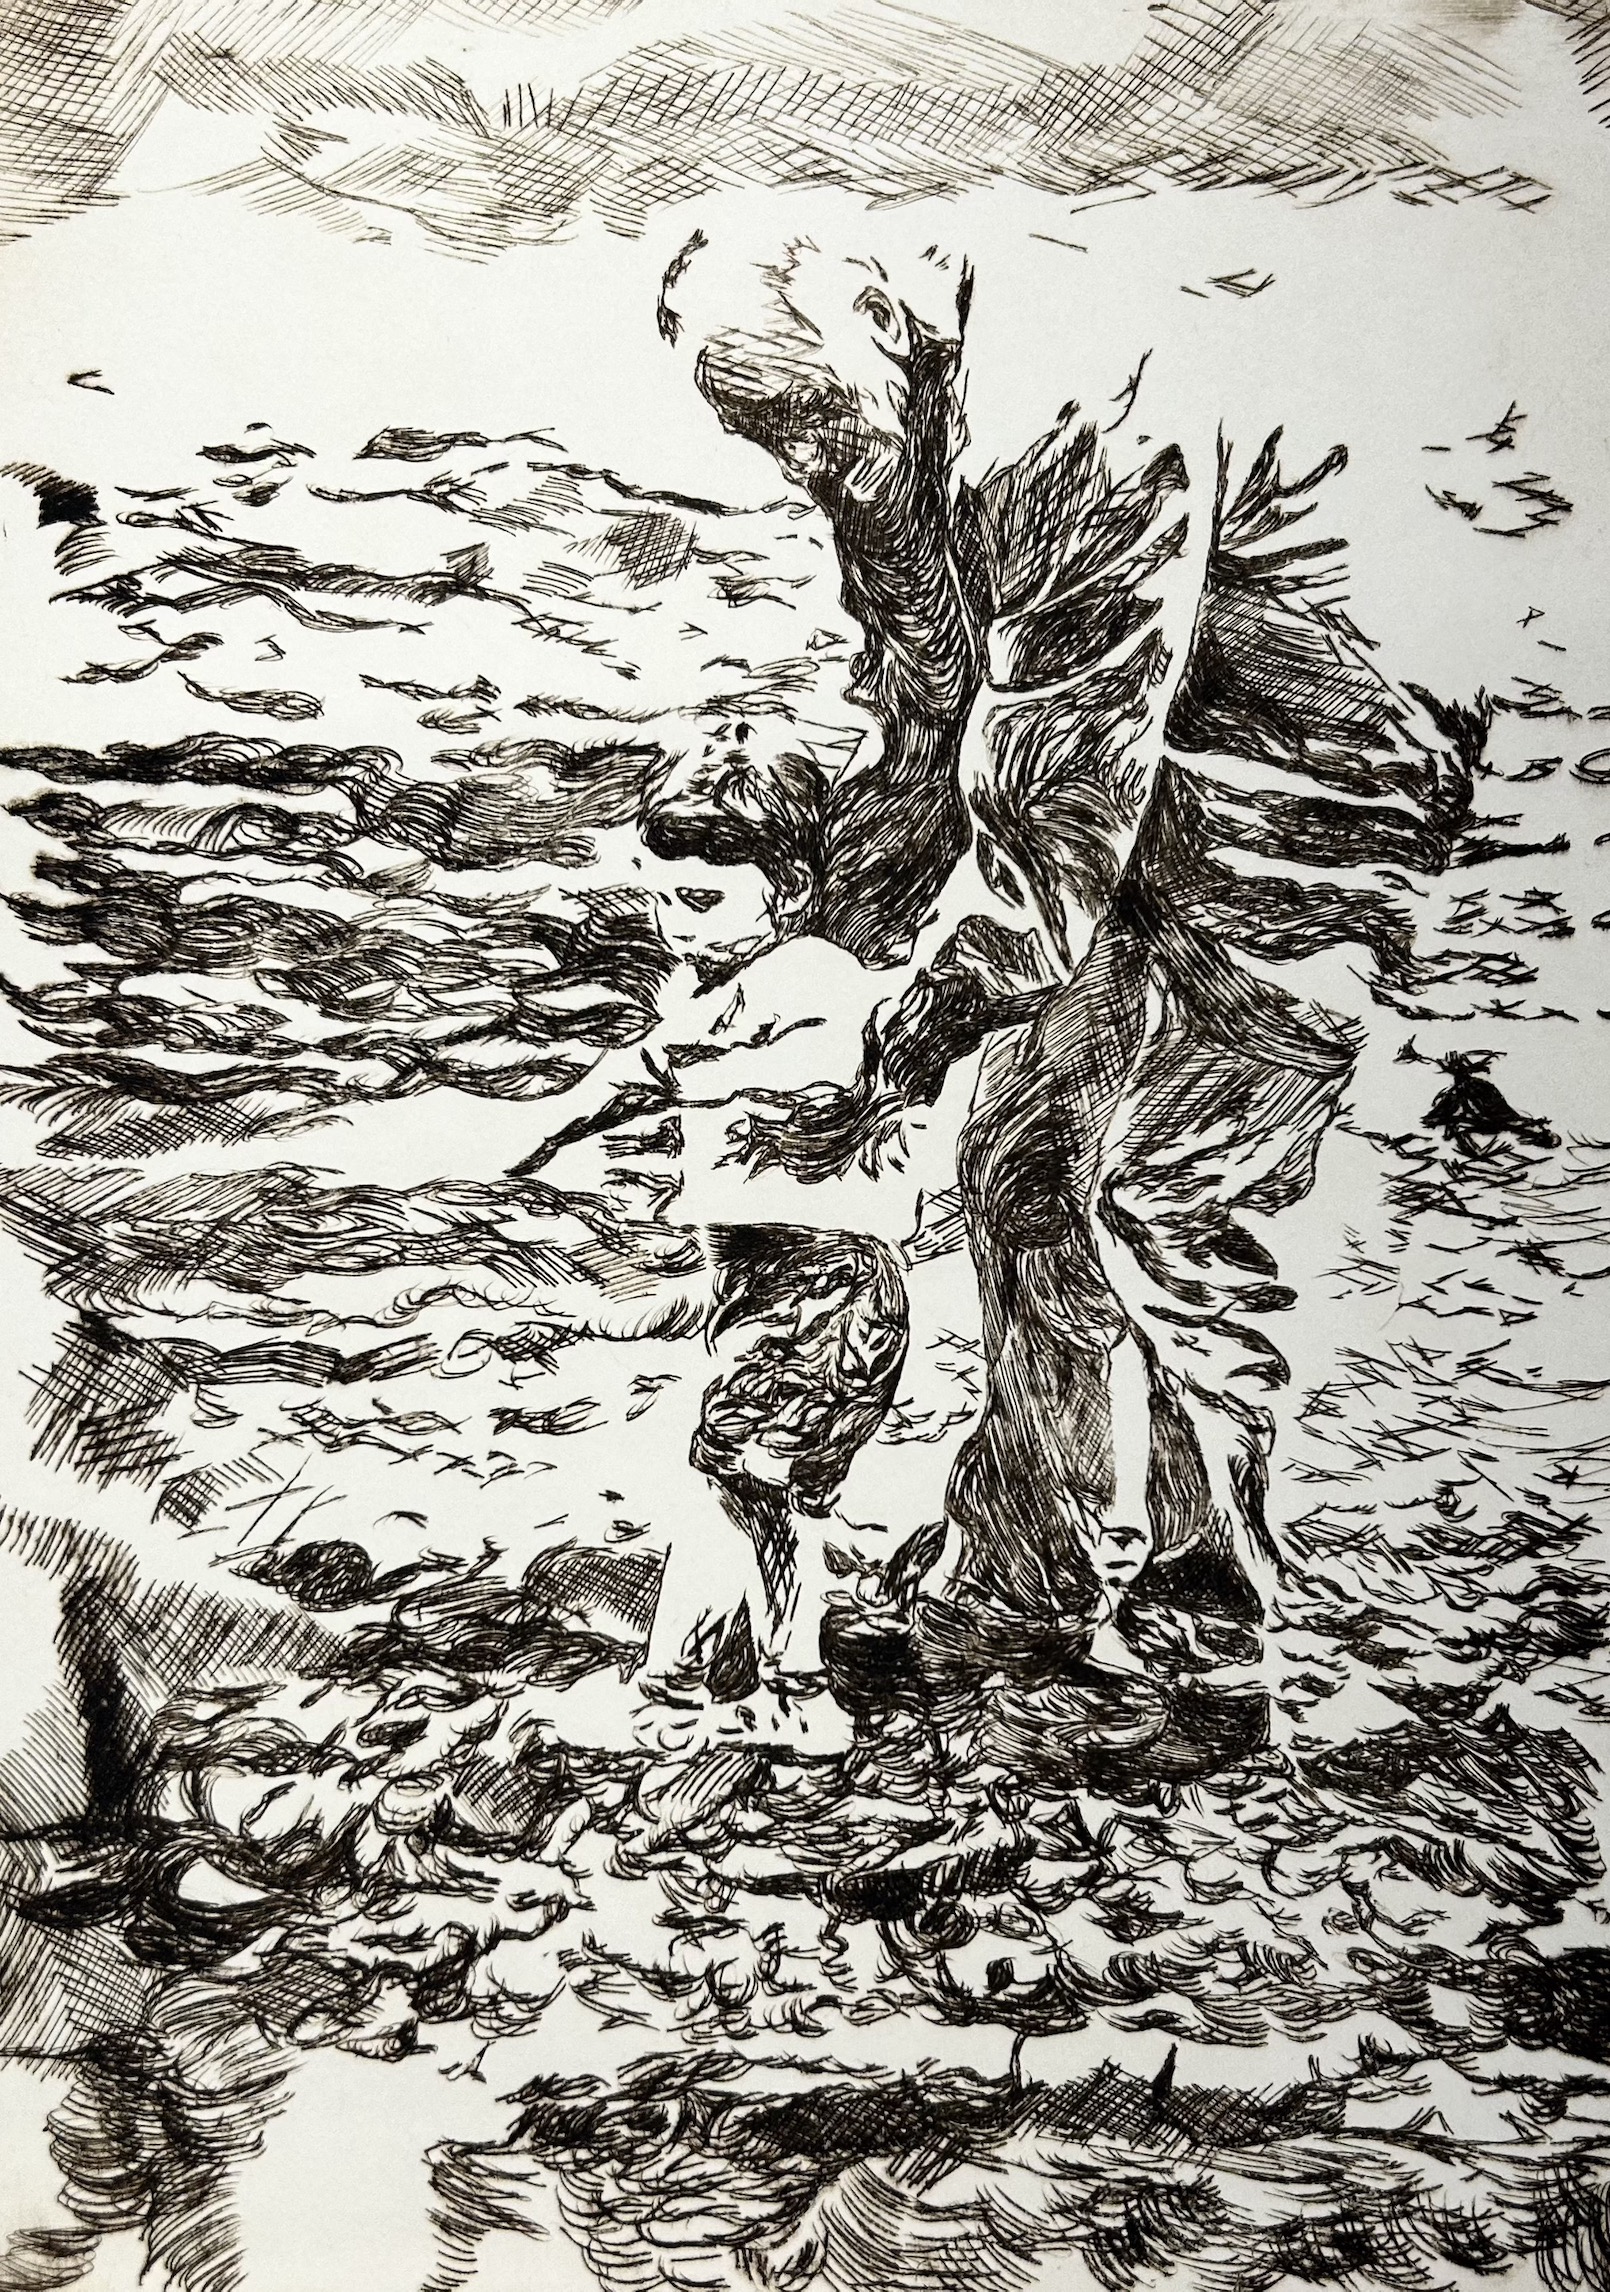 Fine Art work by Emma Bidwell showing an intricate intaglio print of herself and grandfather playing in the sand on the beach.